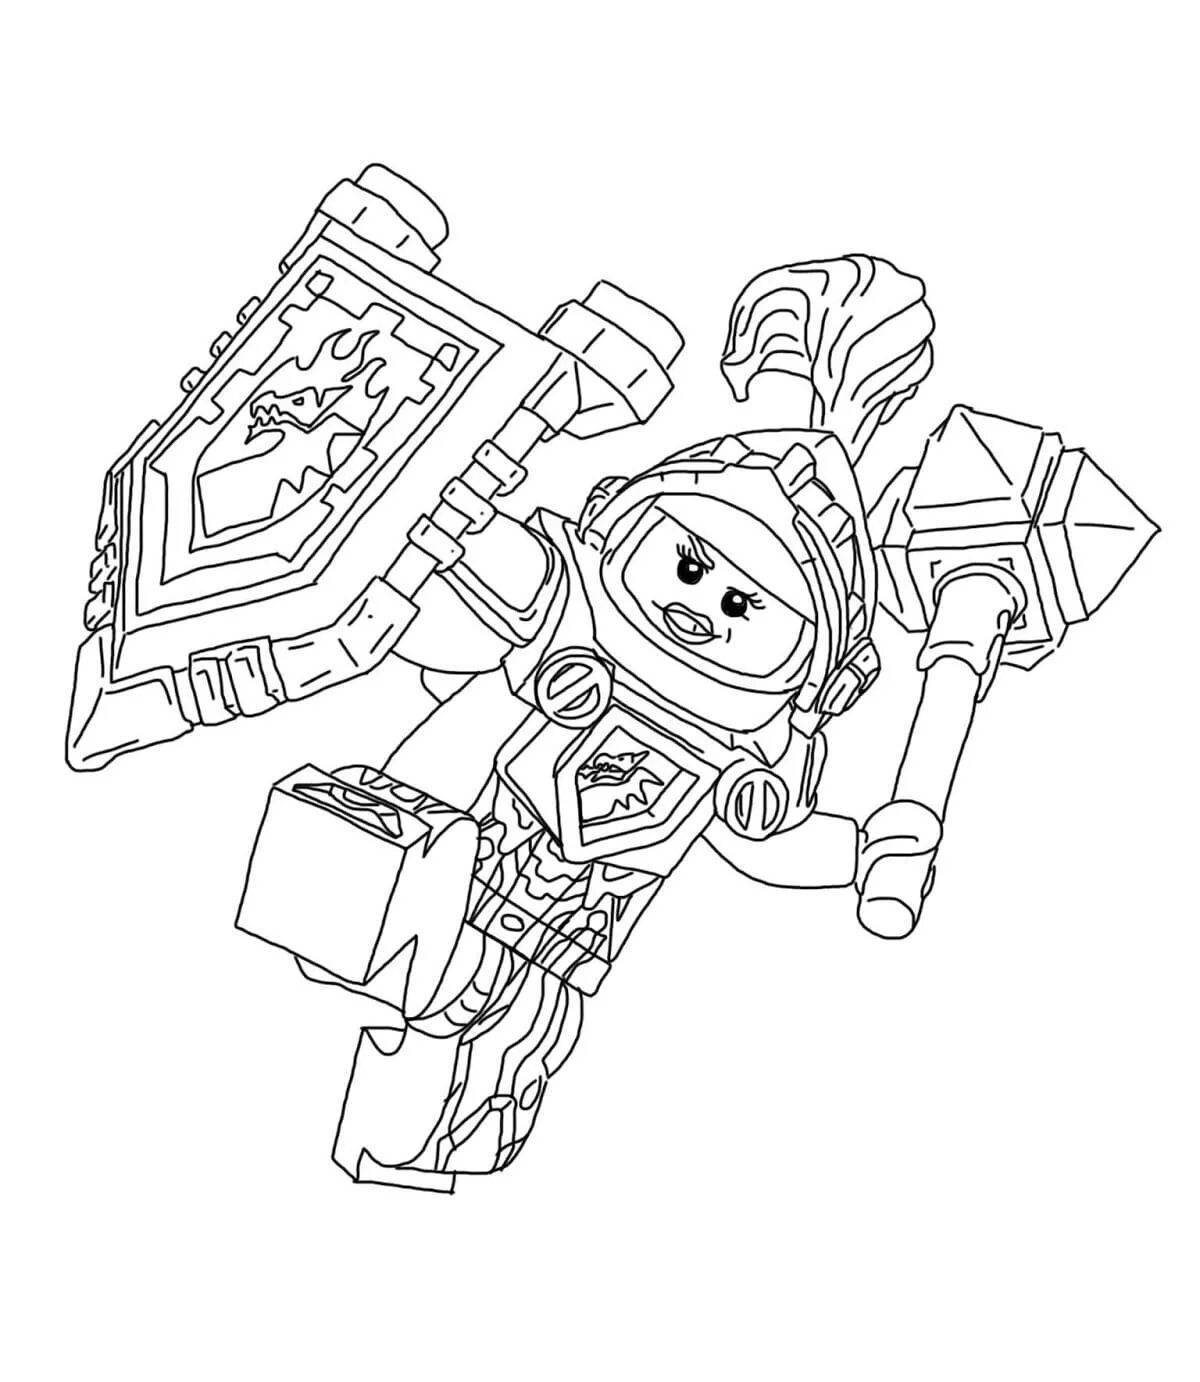 Attraction nexo knights coloring book